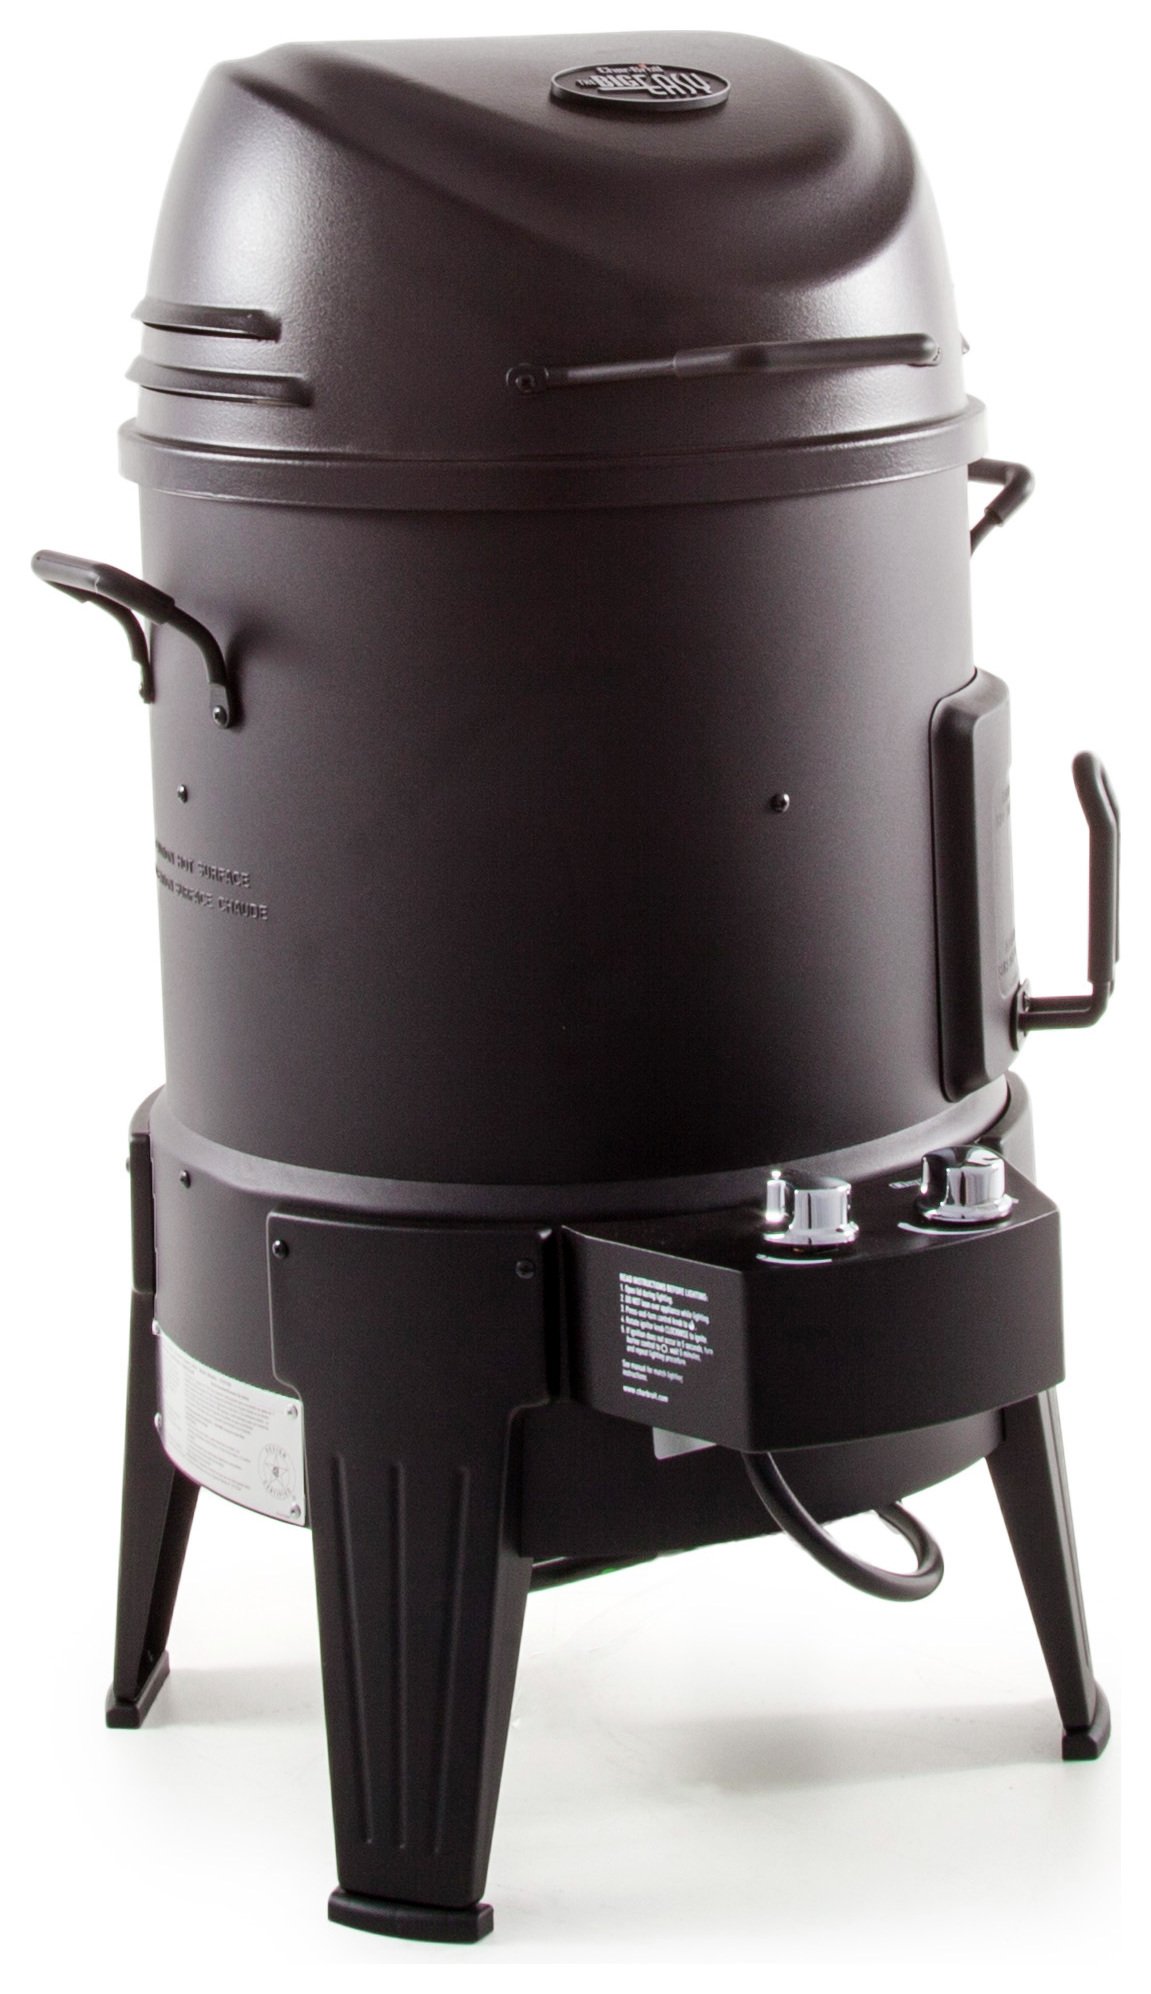 Char-Broil The Big Easy 3-in-1 Smoker, Roaster and Grill